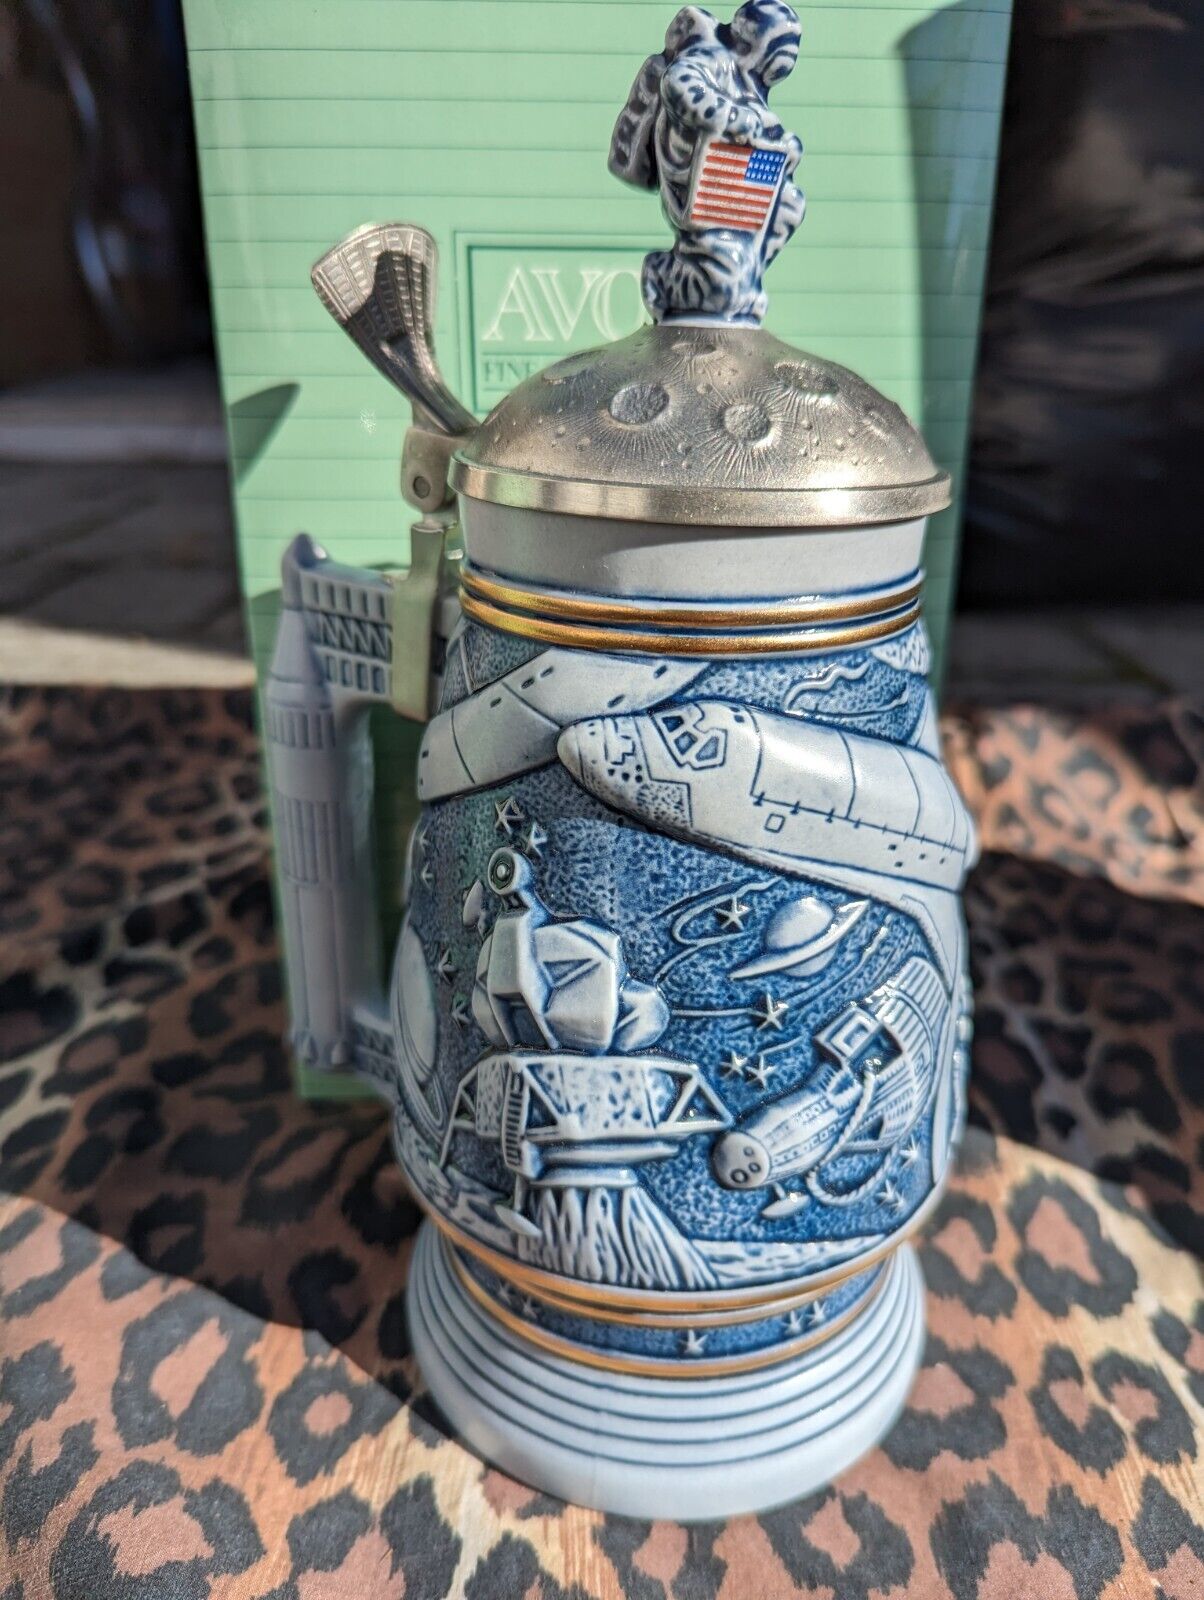 NEW Avon Fine Collectibles Gone to the Moon NASA Beer Stein VINTAGE 1991